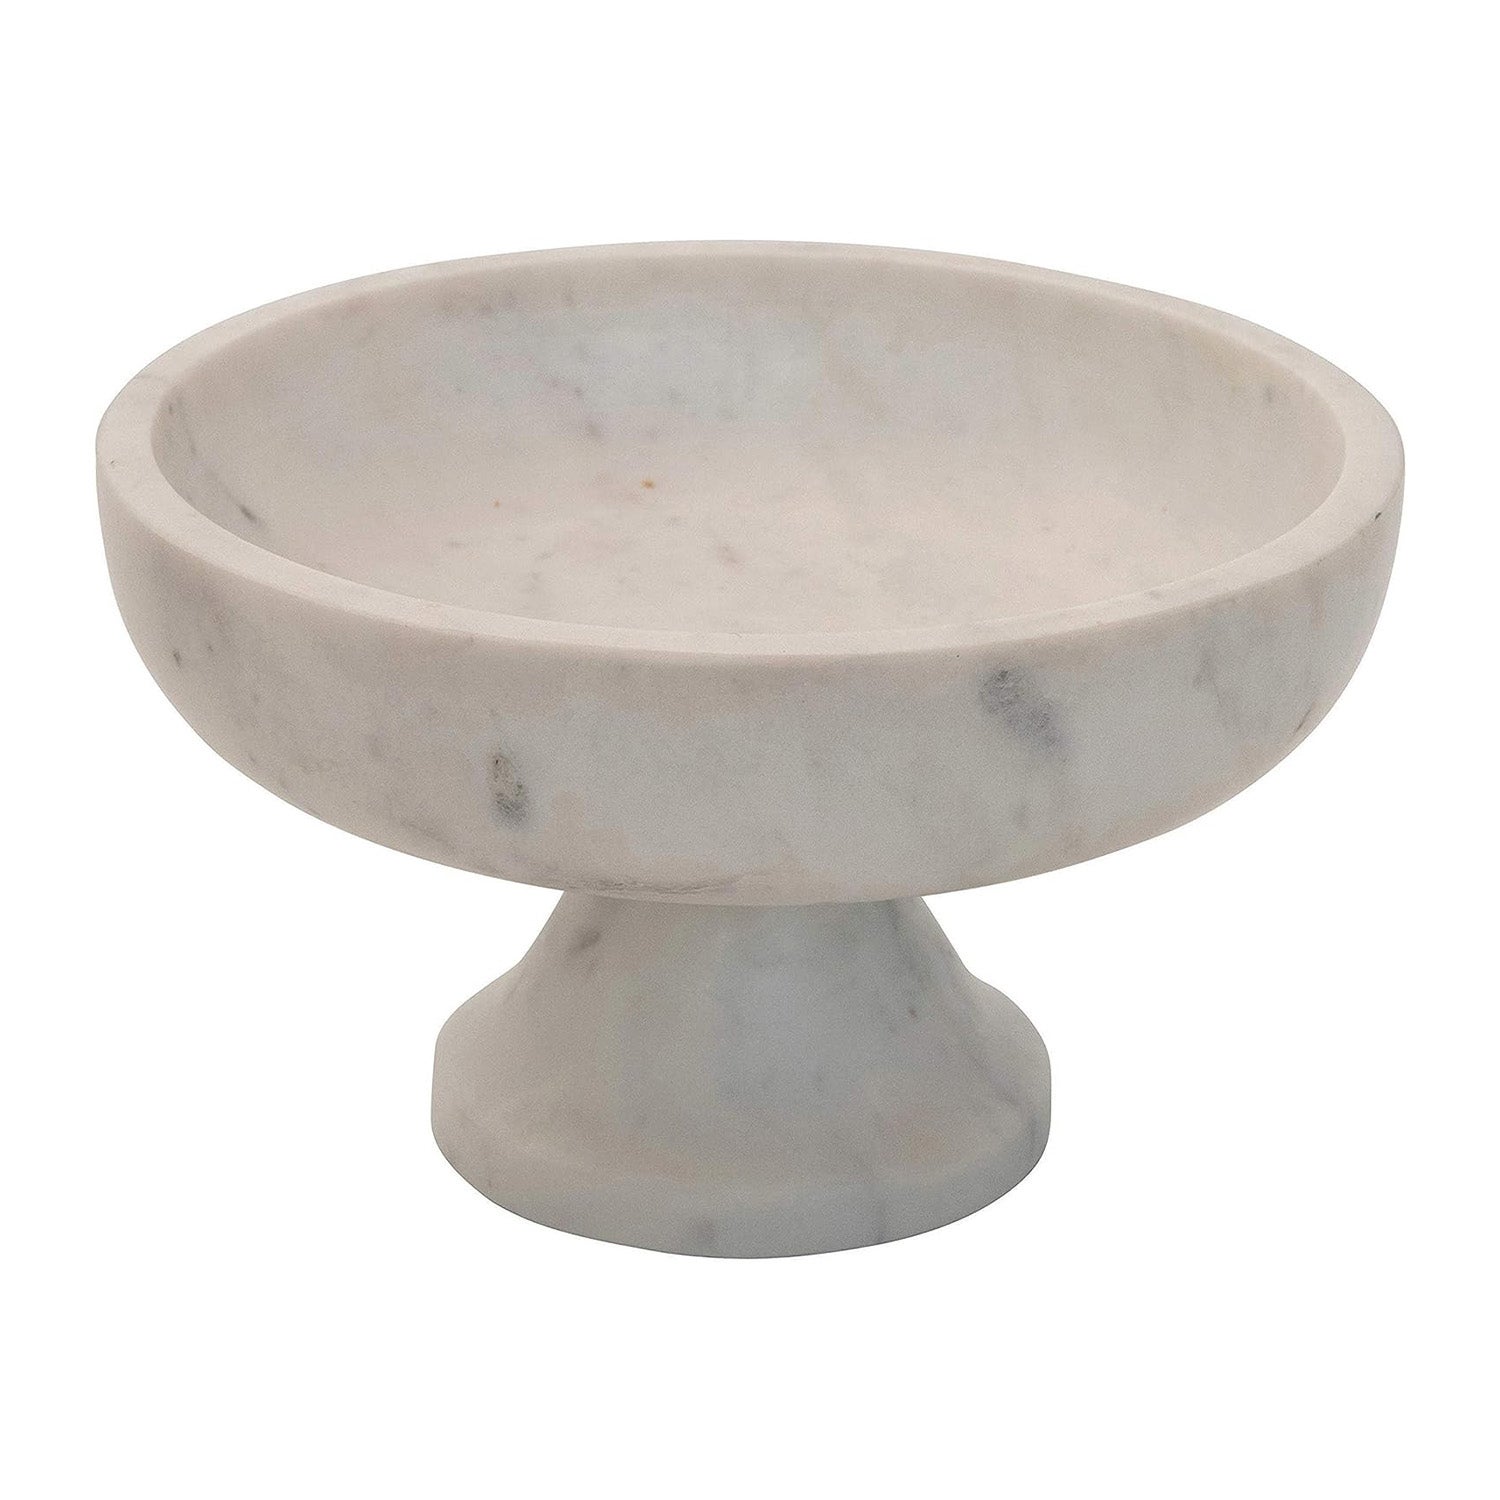 Bloomingville Marble Footed, White Bowl